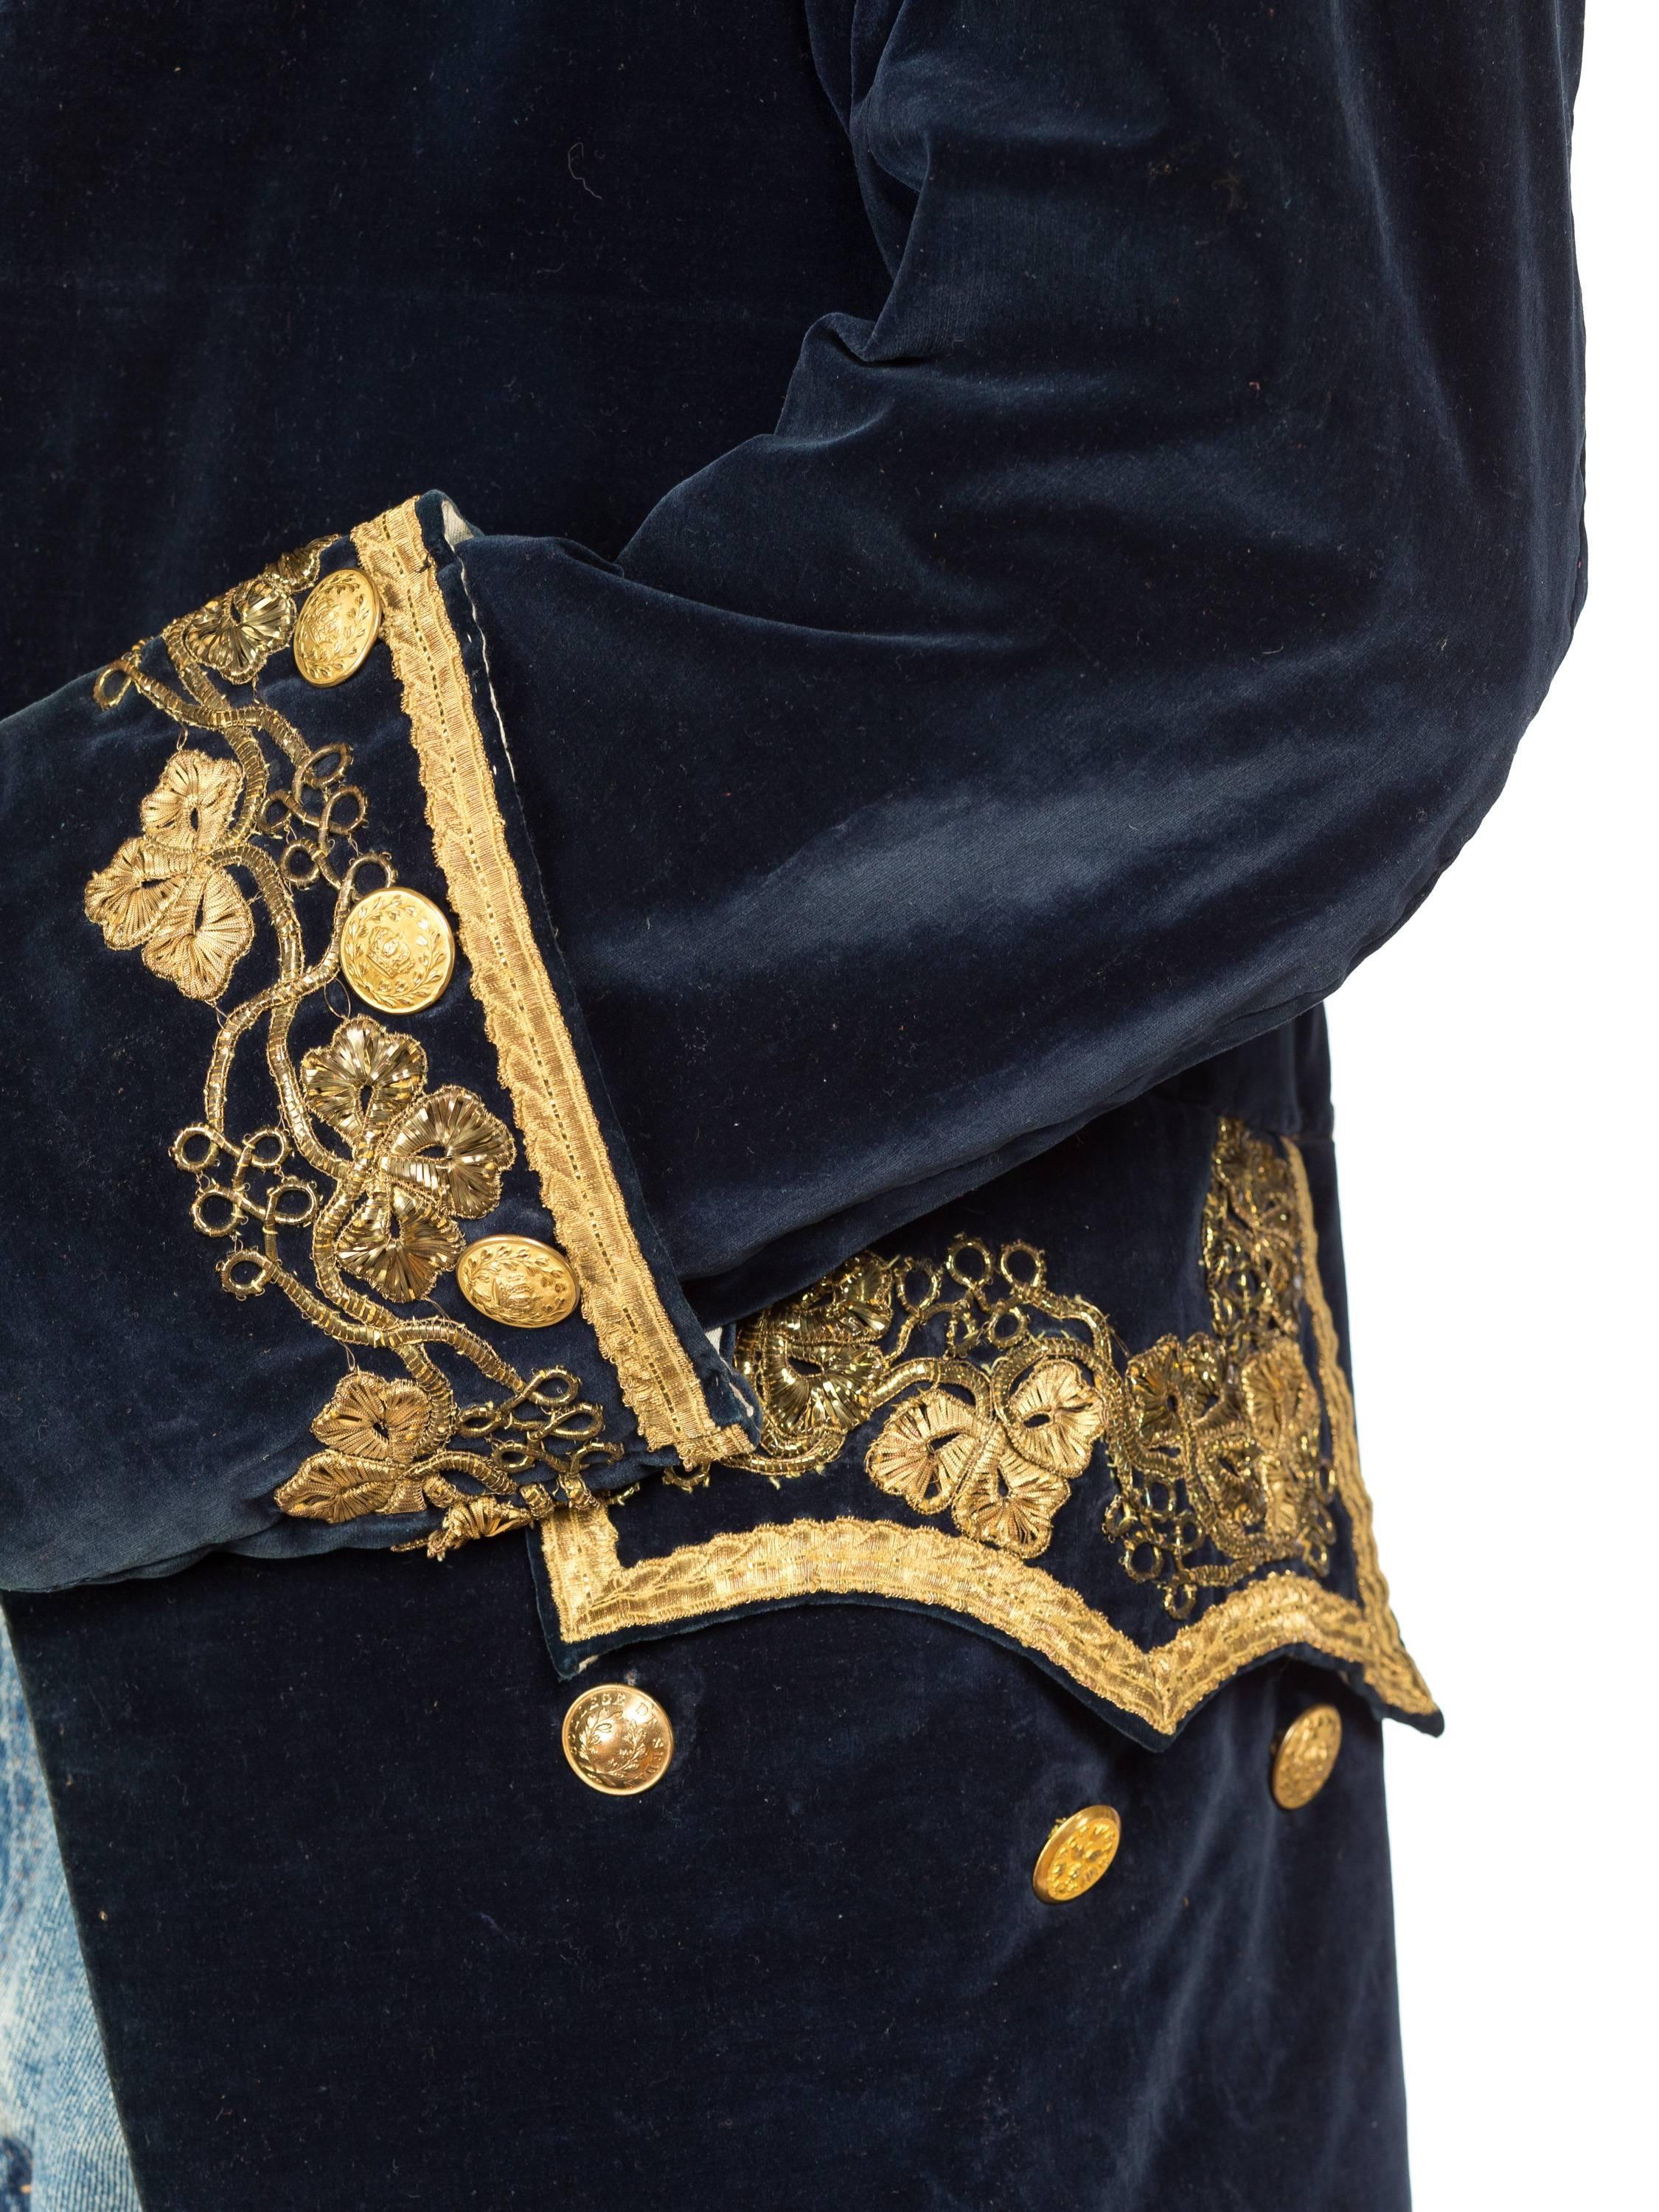 Victorian Men's Frock Coat in the 18th Century Style  5